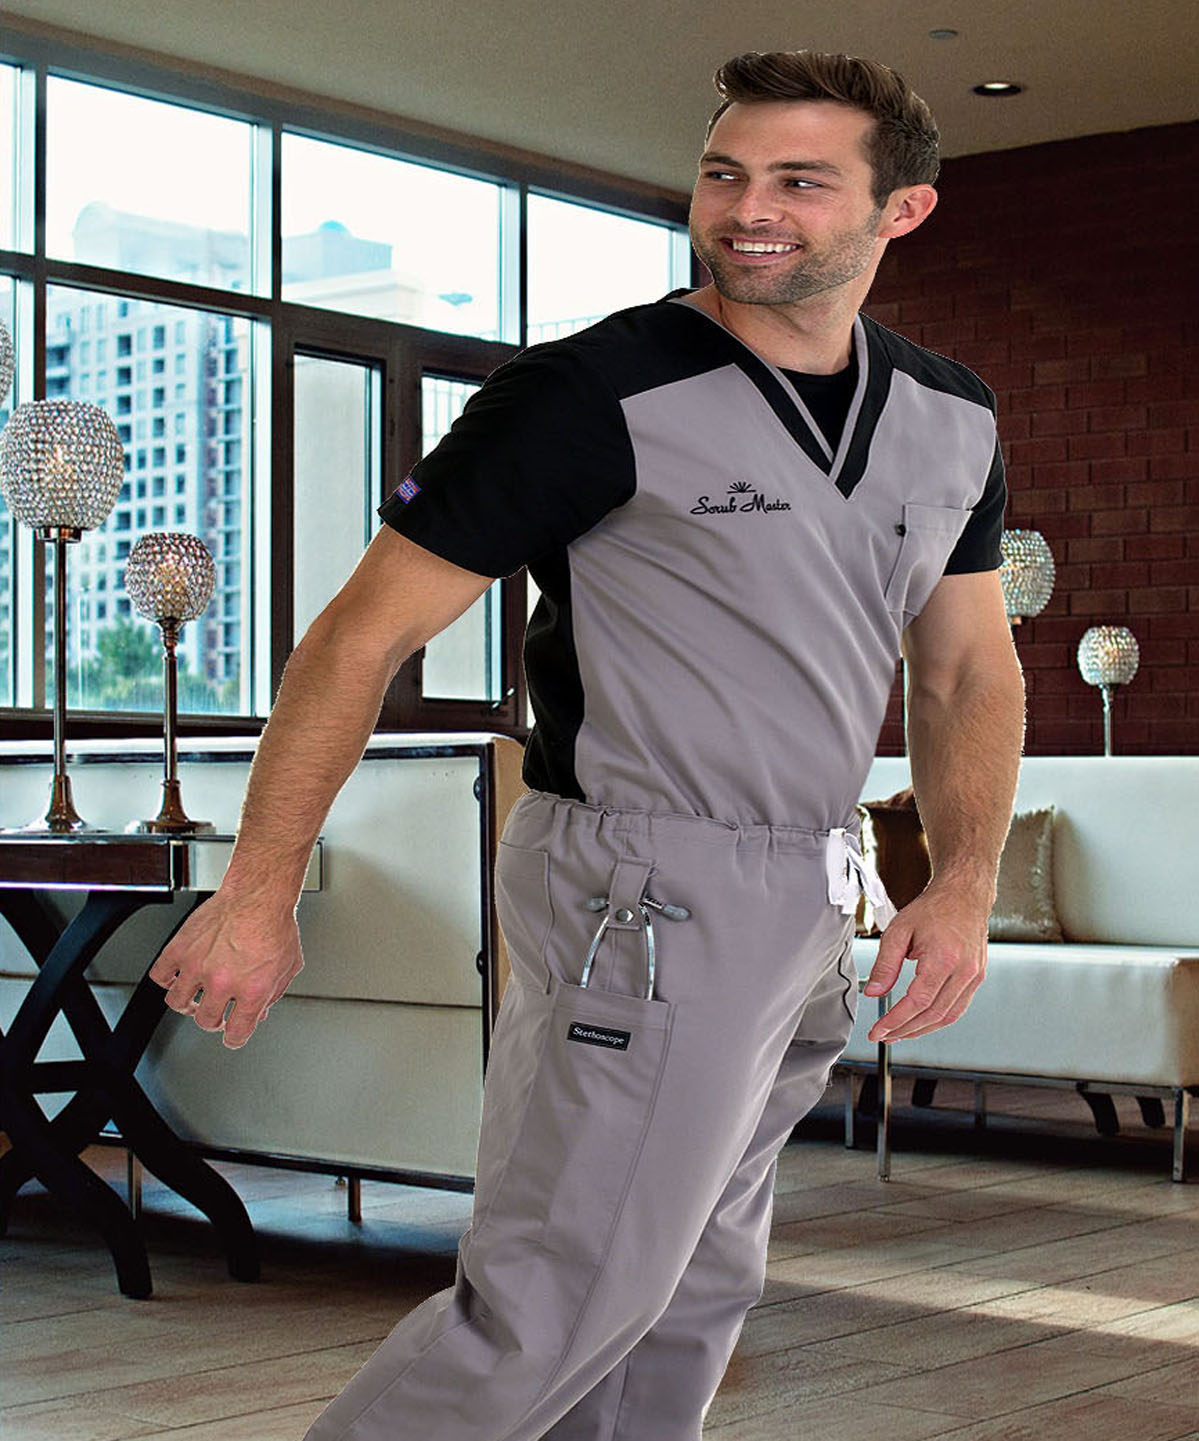 This is a picture of one of our male models wearing scrub master utility patent design scrub wear. Our scrubs are scientifically proven to stop hospital acquired infections and save lives. These scrub uniforms and jackets are the most advanced hospital and clinic medical uniforms on the market today. Shop scrub master and save big money.